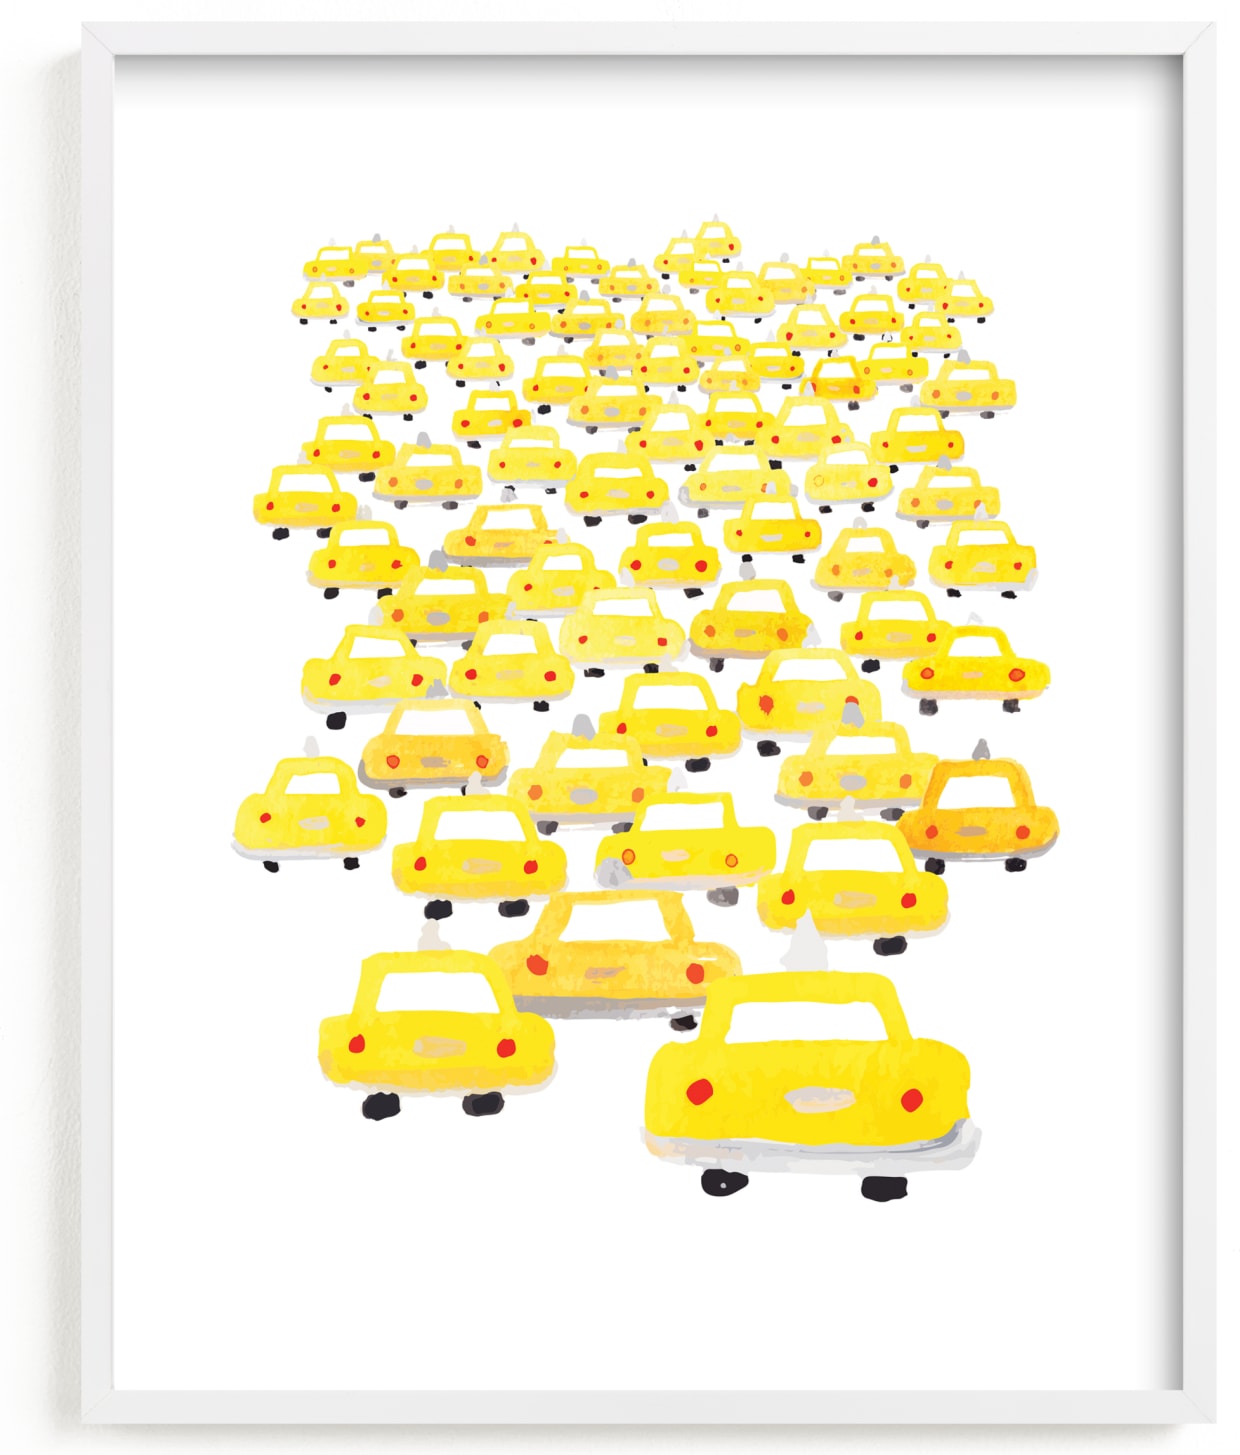 This is a white kids wall art by BernadetteSosa called Taxis in Traffic.